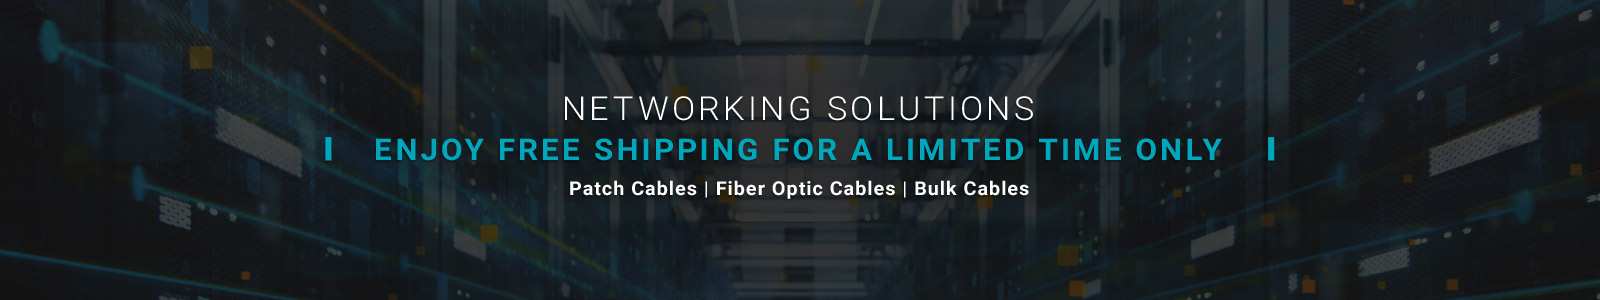 Networking Solutions
Enjoy Free Shipping for a Limited Time Only
Patch Cables | Fiber Optic Cables | Bulk Cables
Shop Now